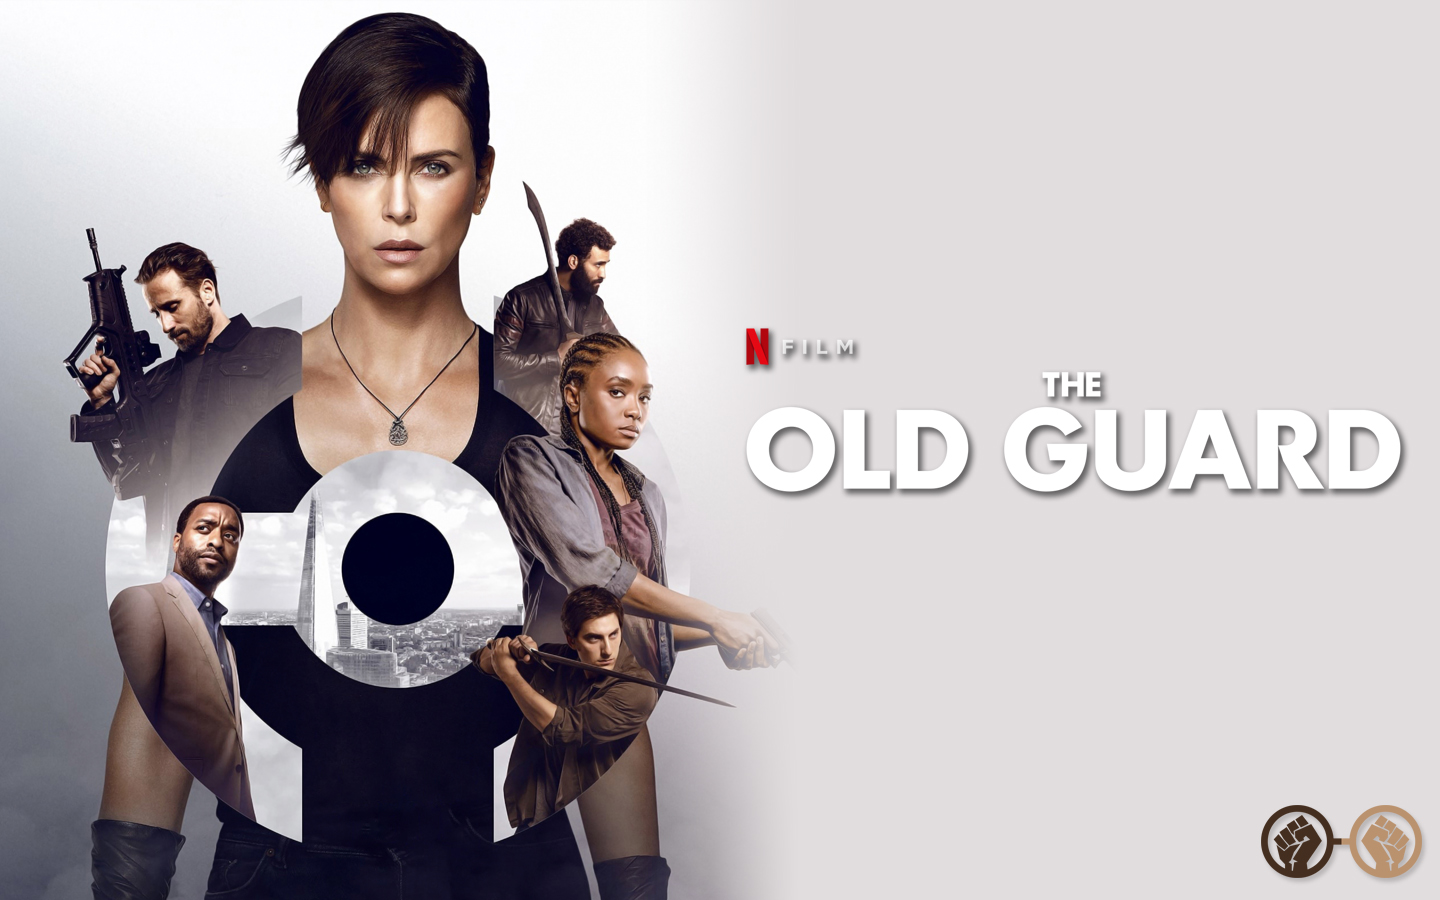 Gina Prince-Bythewood’s Adaptation of Greg Rucka’s Epic Comic ‘The Old Guard’ Is An Awesome Time – Review